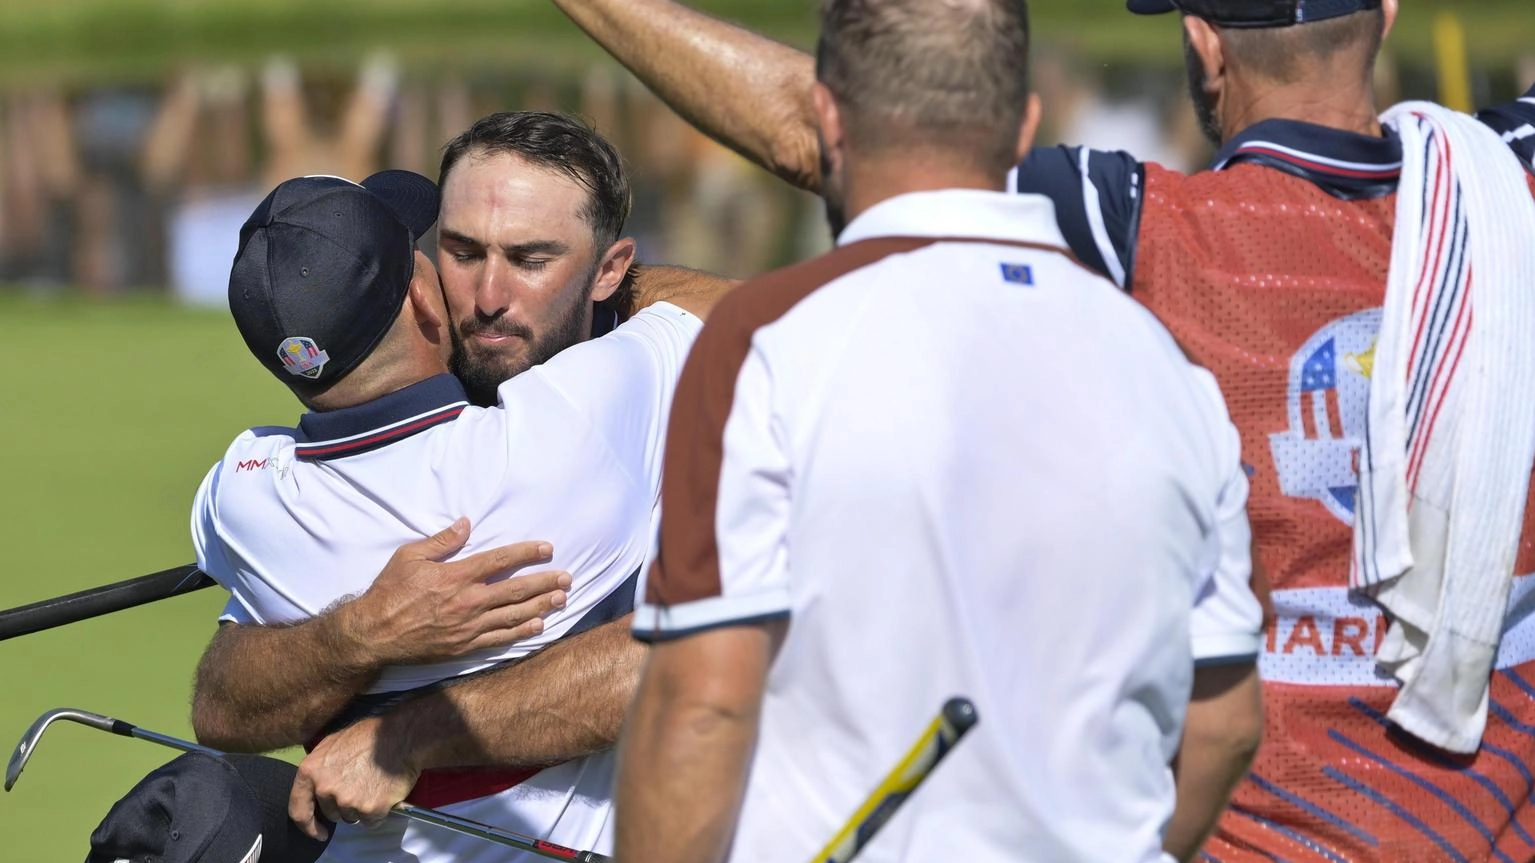 Ryder Cup: Usa accorciano, 9.5-4.5 per il Team Europa